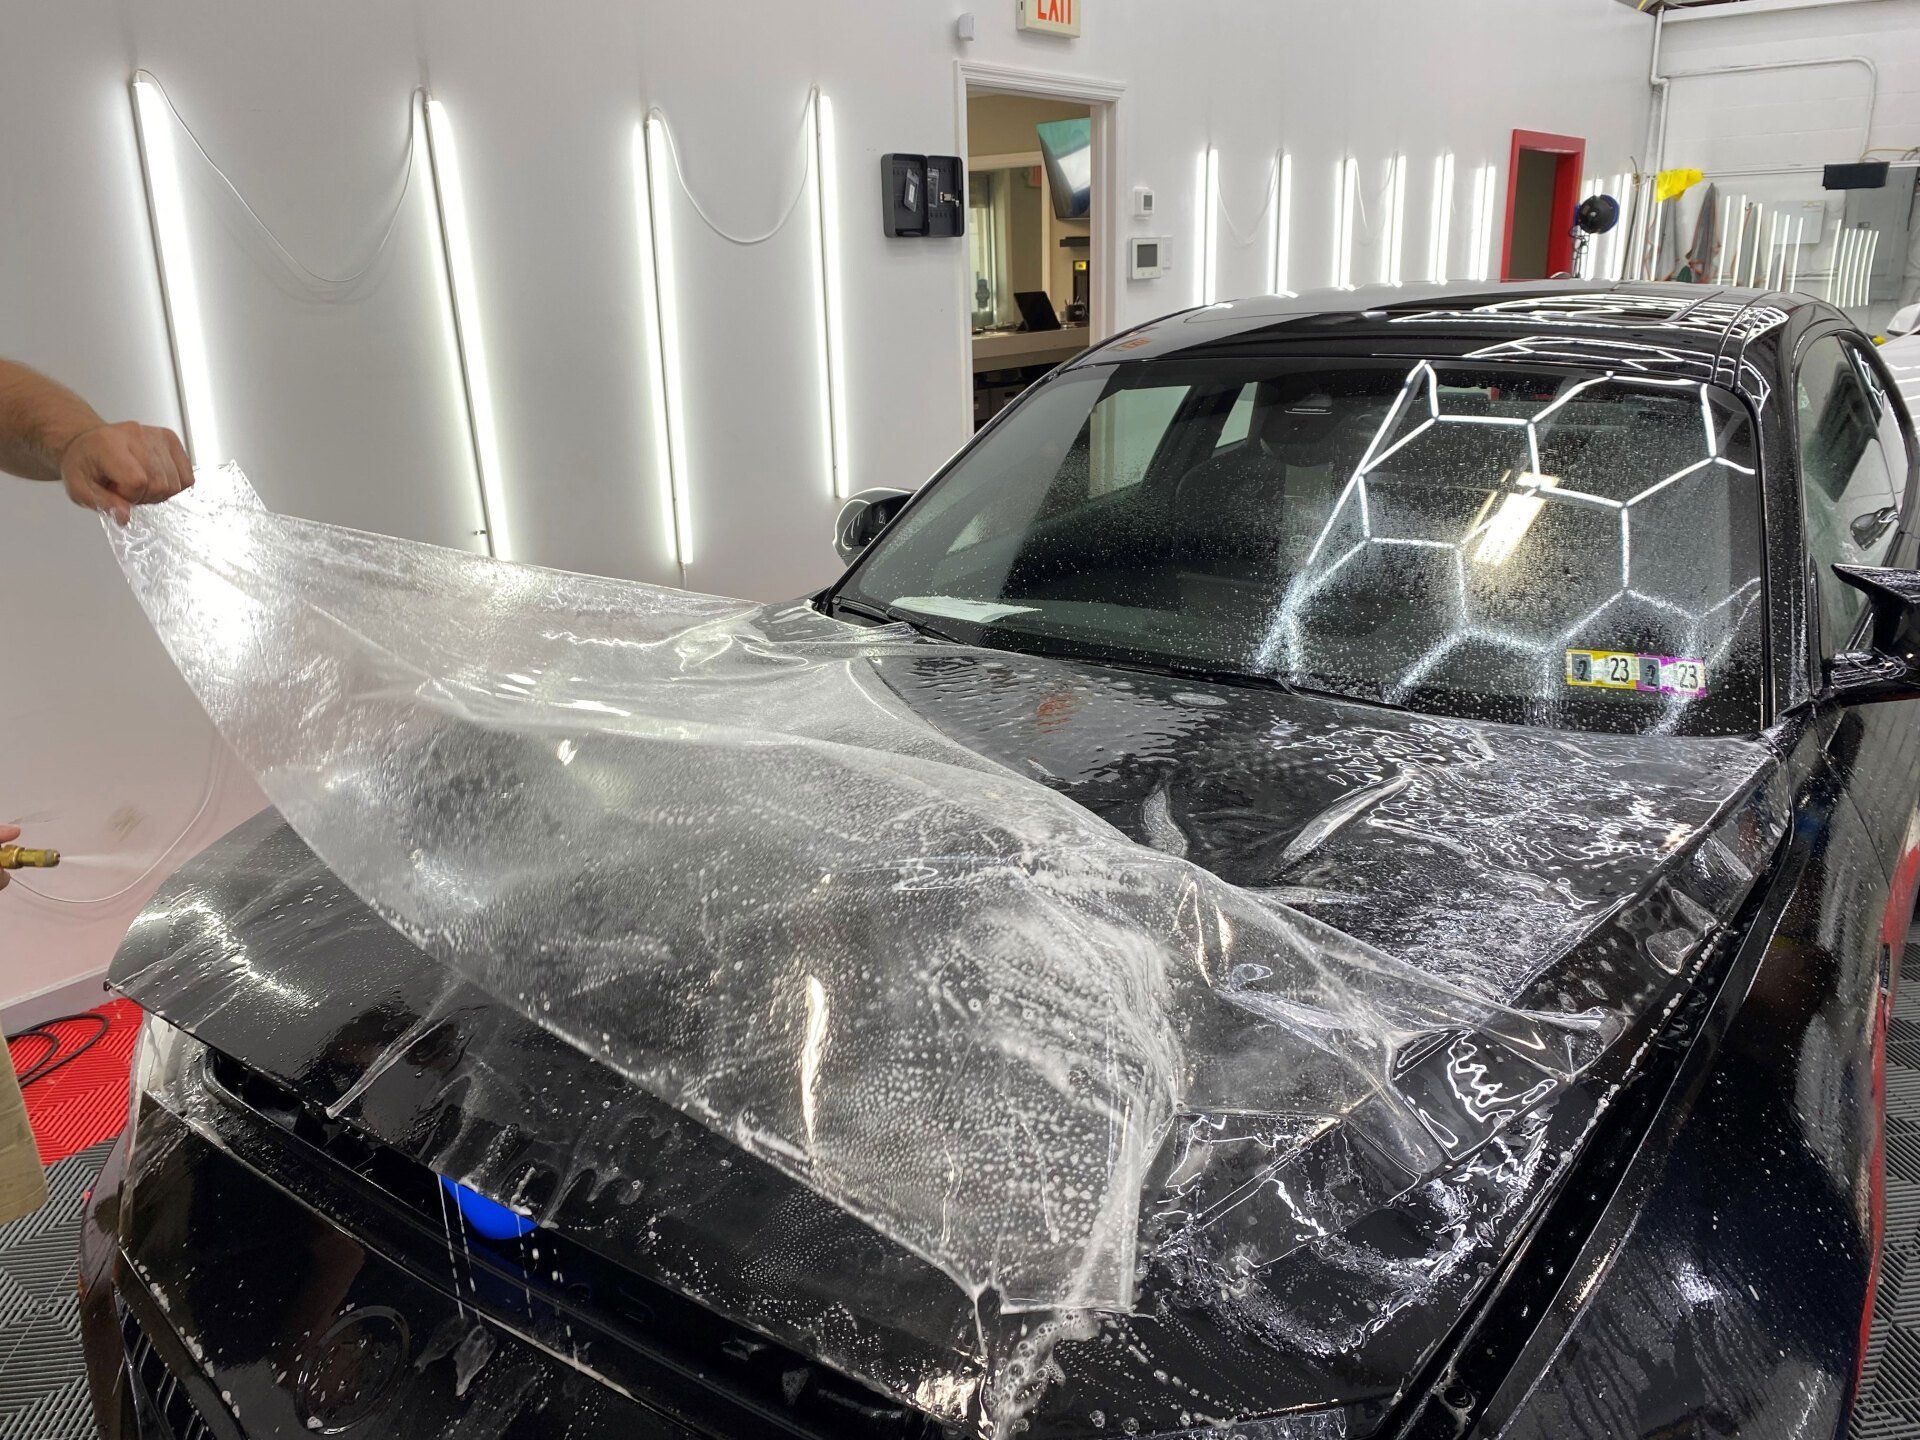 professional paint protection film service in Malvern, PA